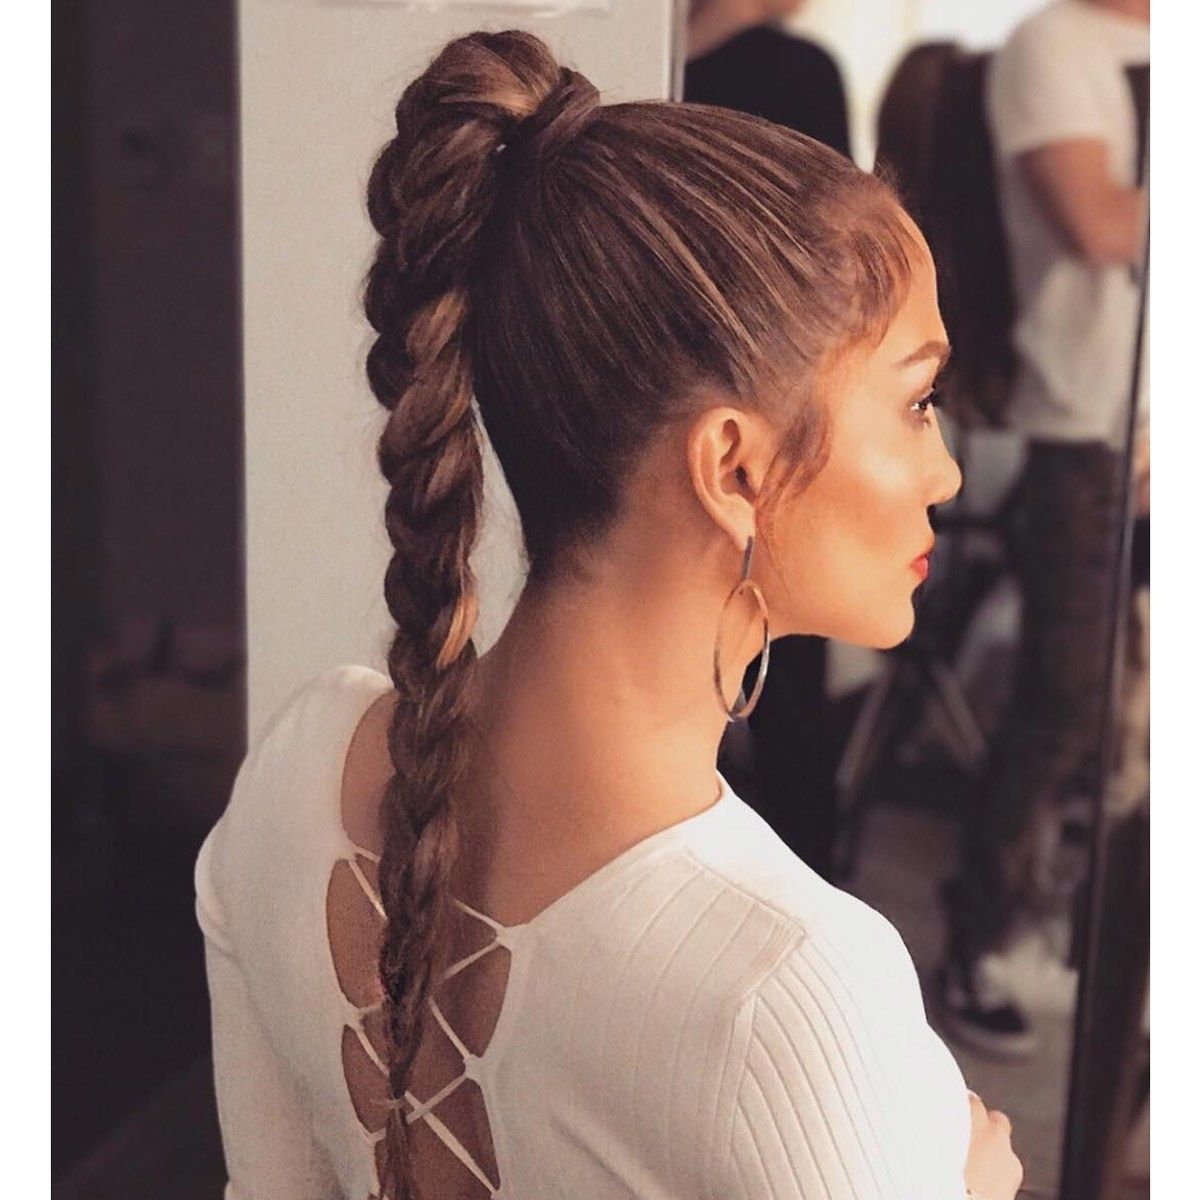 27 Ponytail Hairstyles For 2018: Best Ponytail Styles (View 9 of 20)